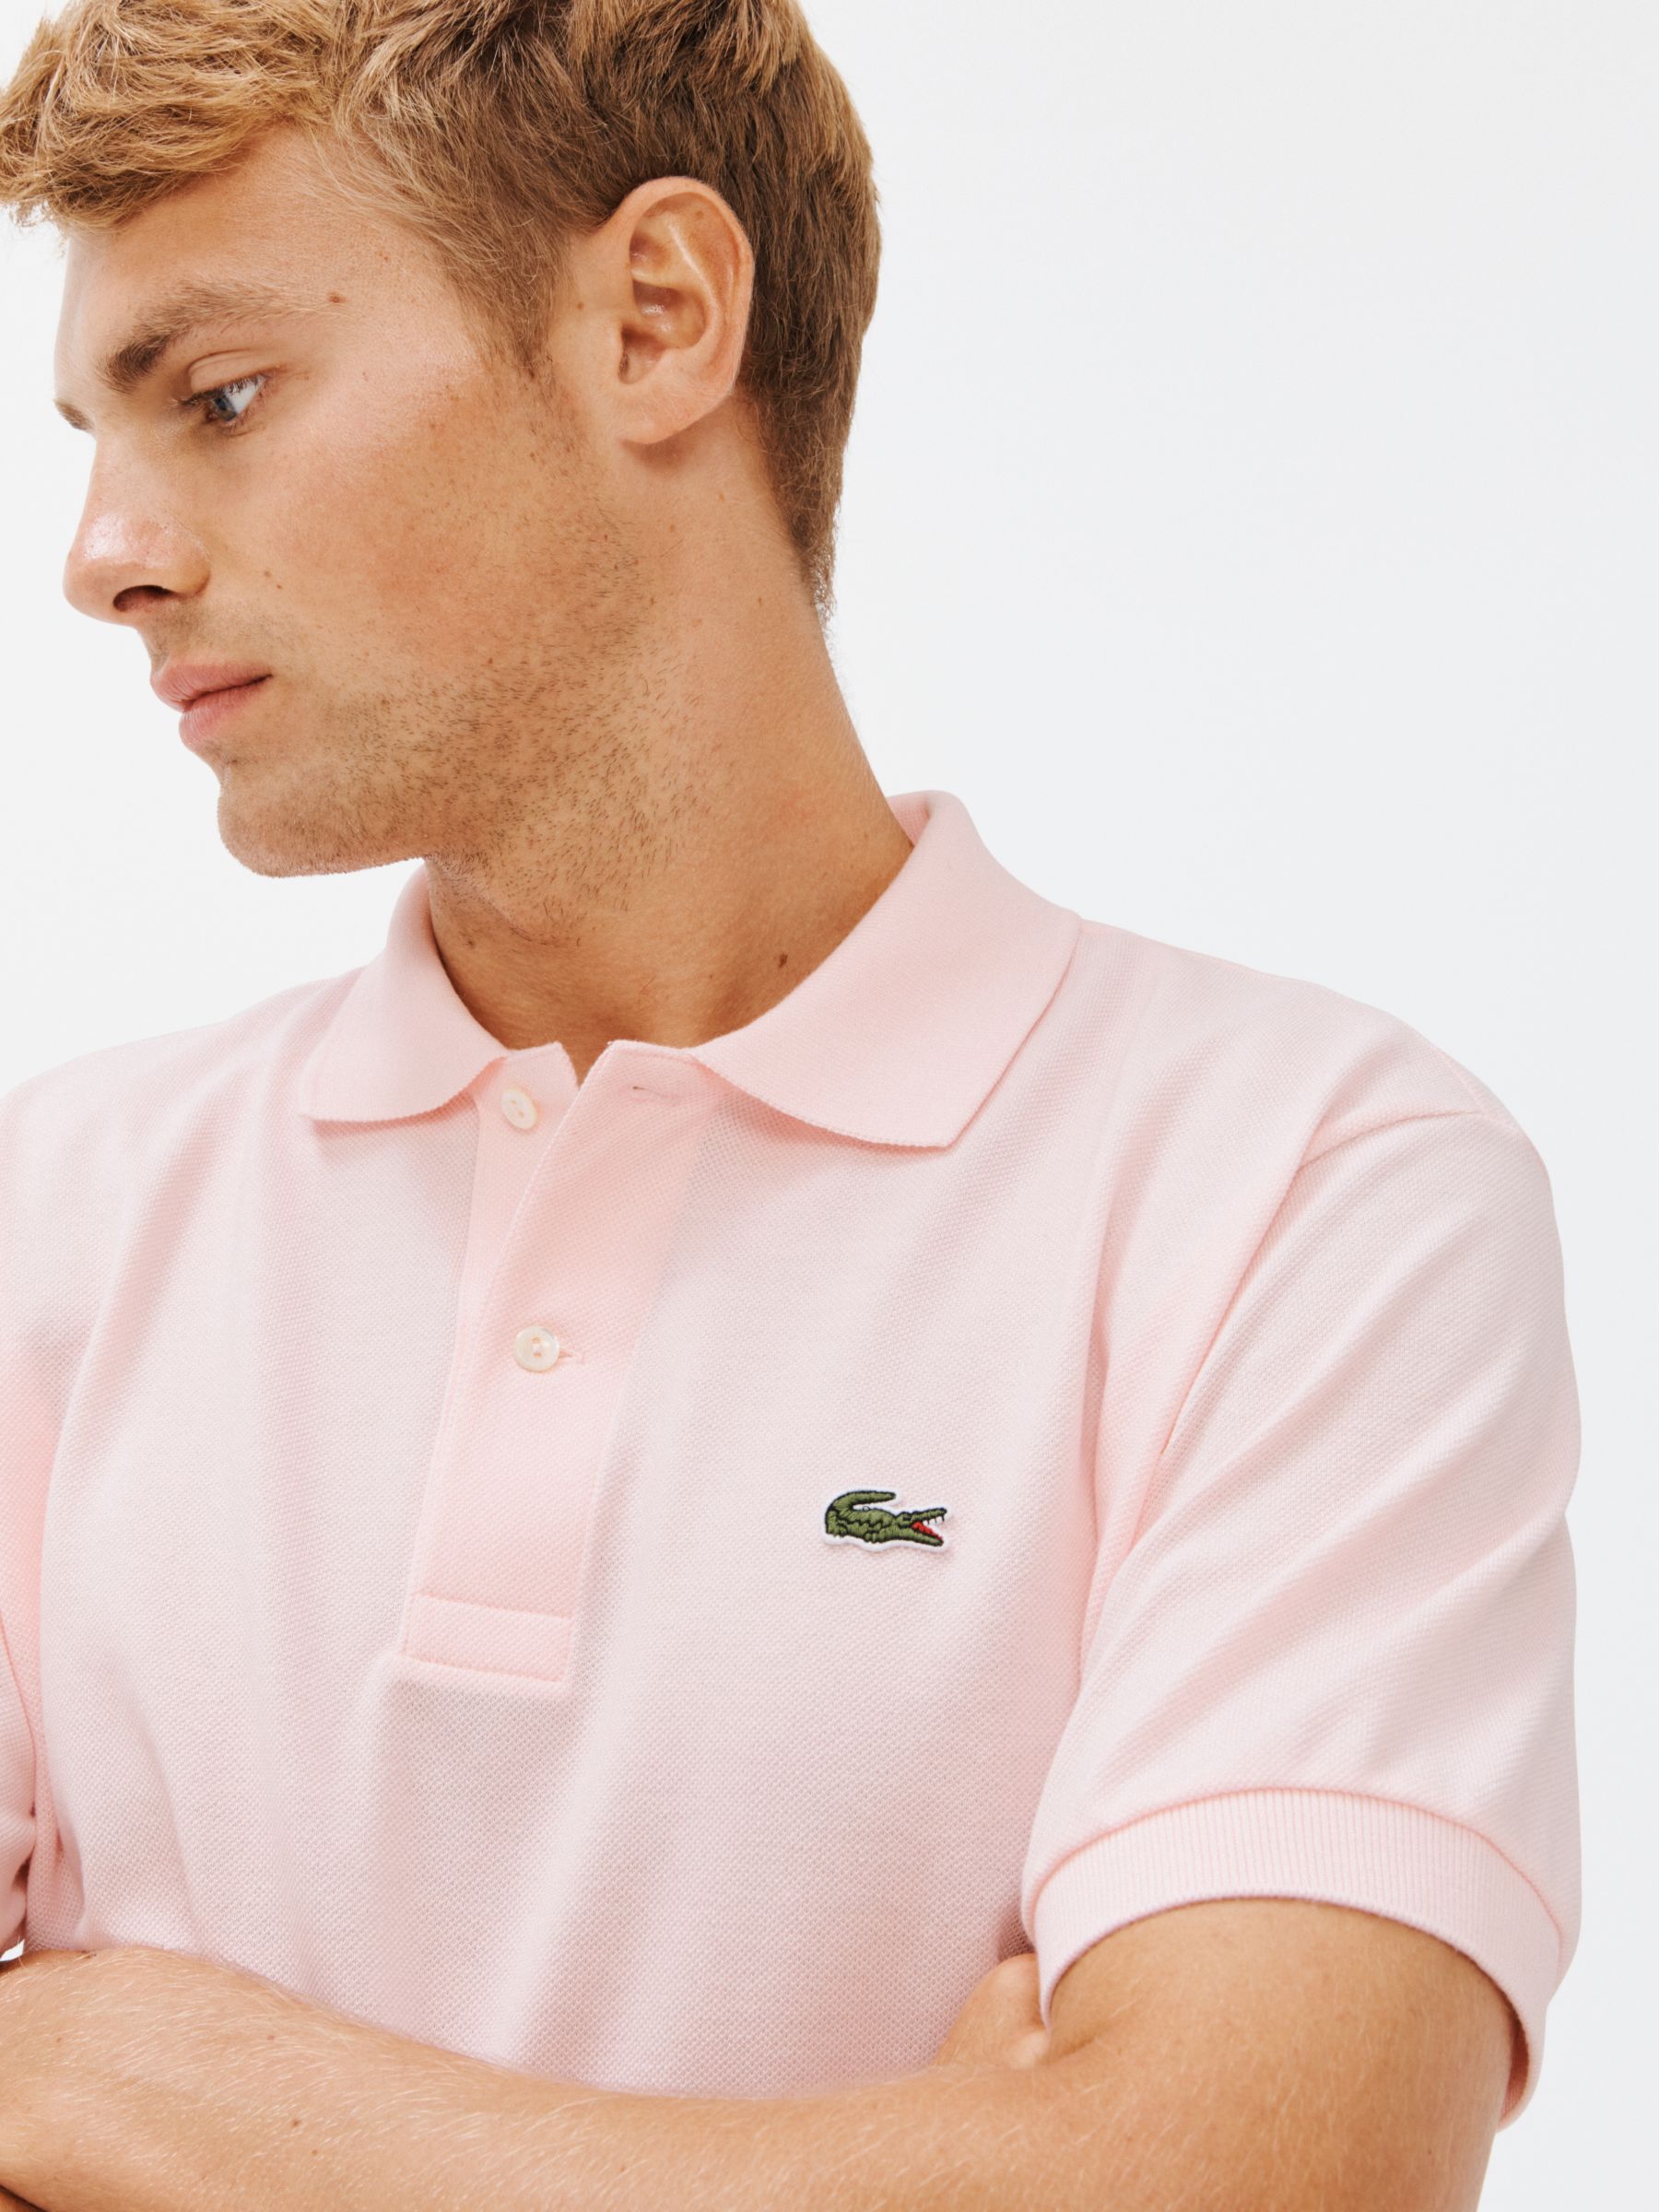 Lacoste Regular Fit Logo Polo Shirt, T03, S